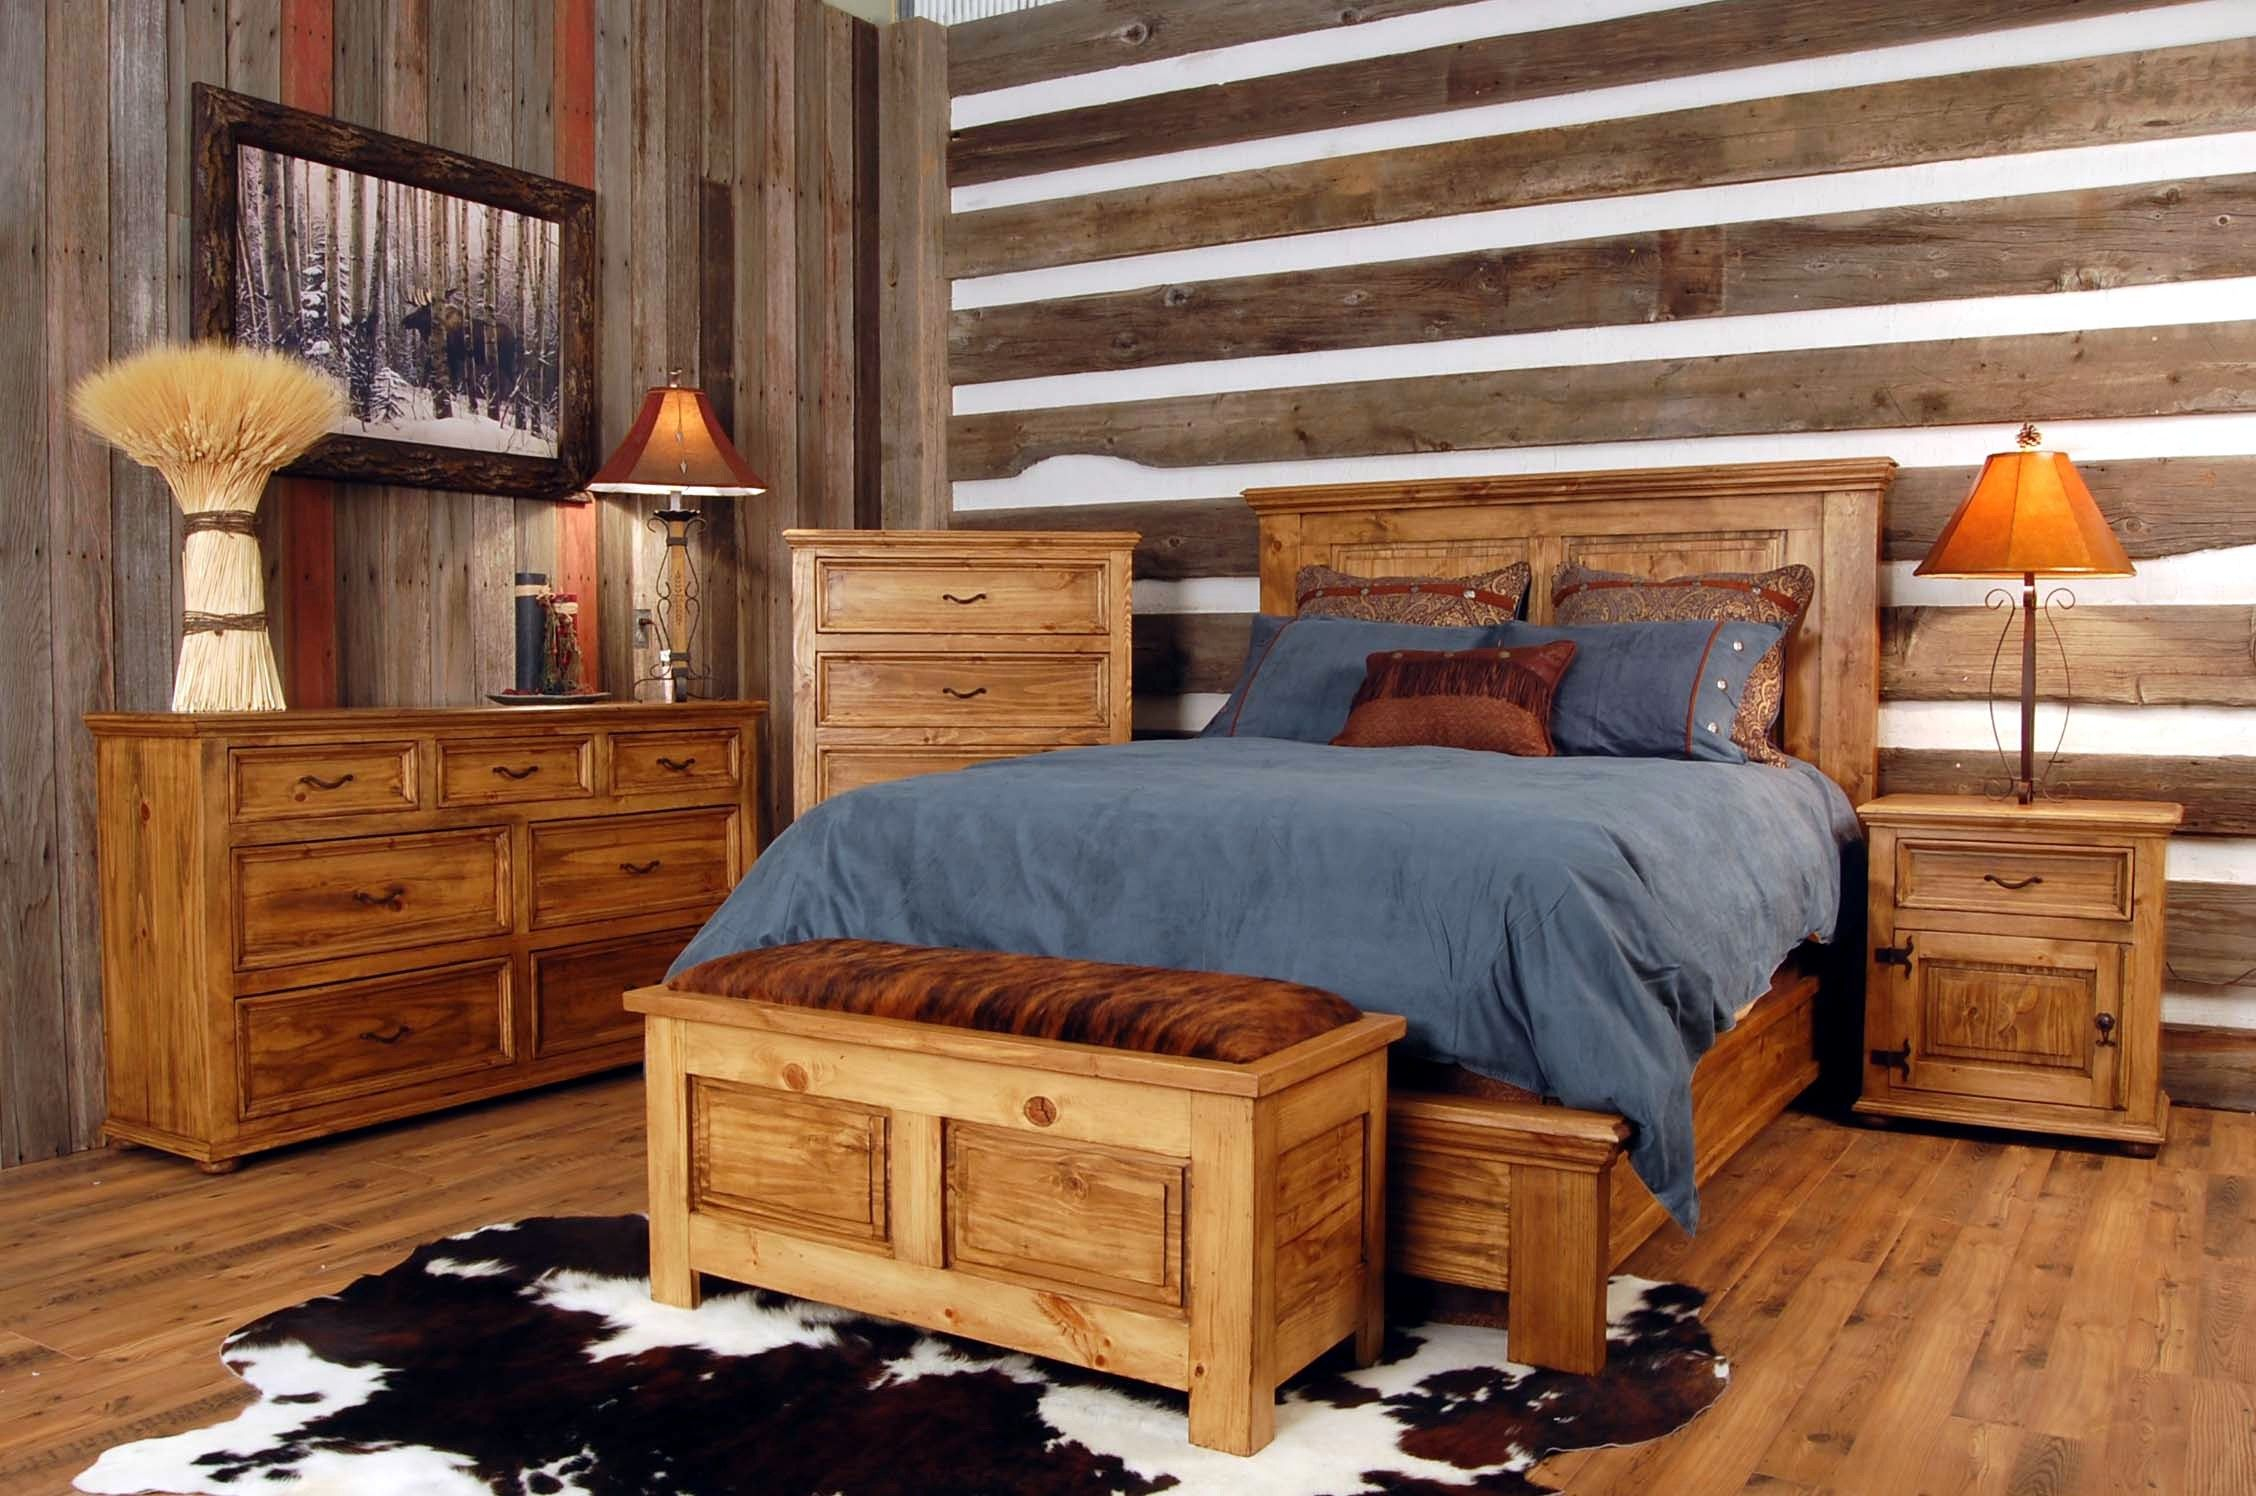 Exquisite Log Cabin House Interior Bedroom Ideas With Rustic Bedroom throughout size 2256 X 1496